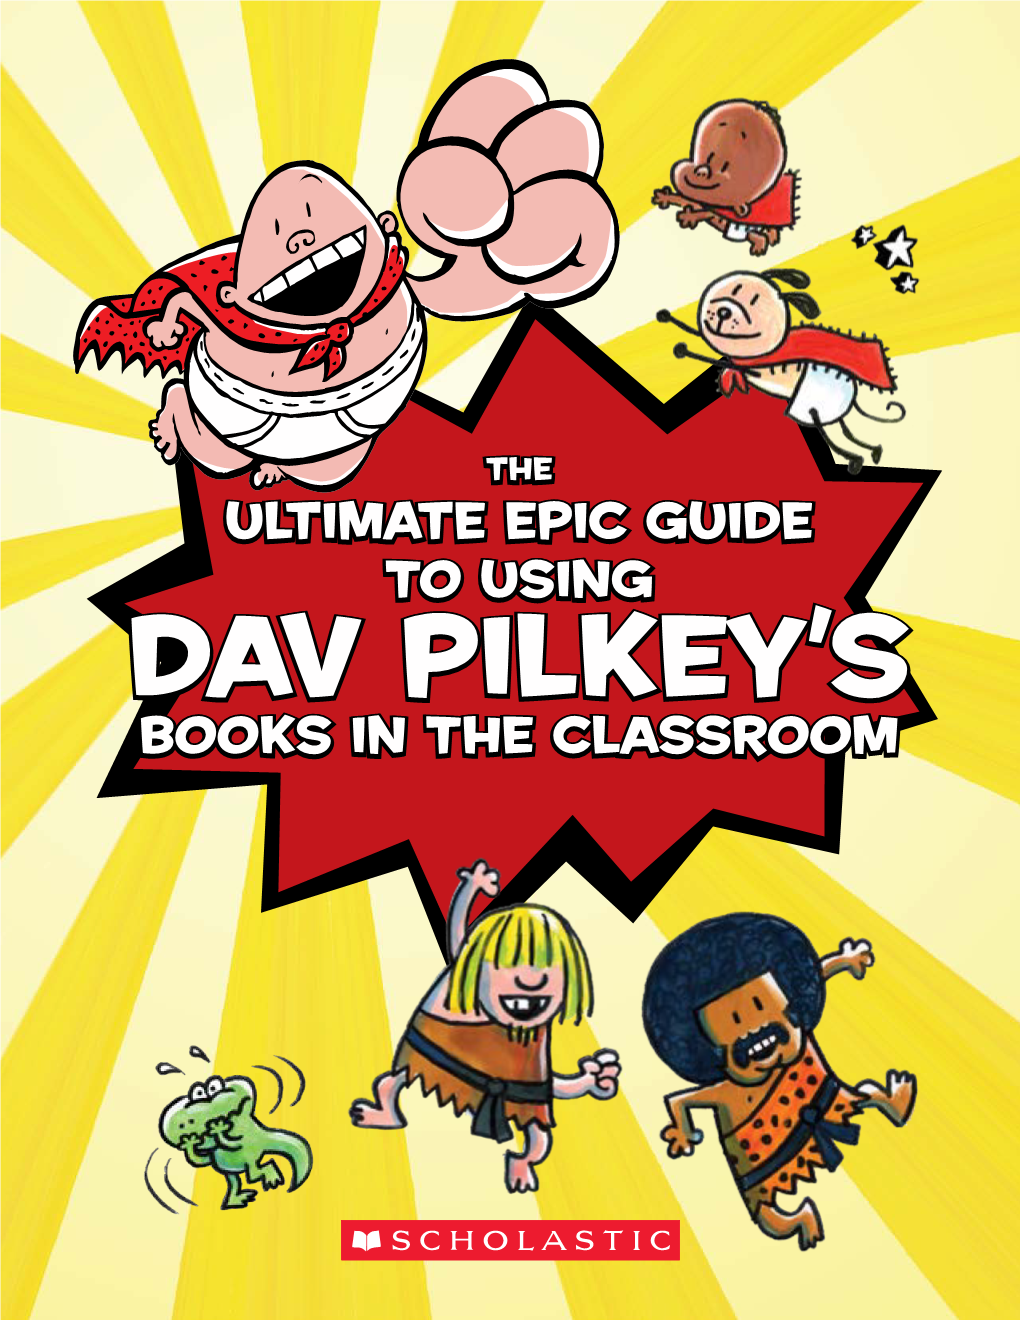 The Ultimate Epic Guide to Using Dav Pilkey's Books in The